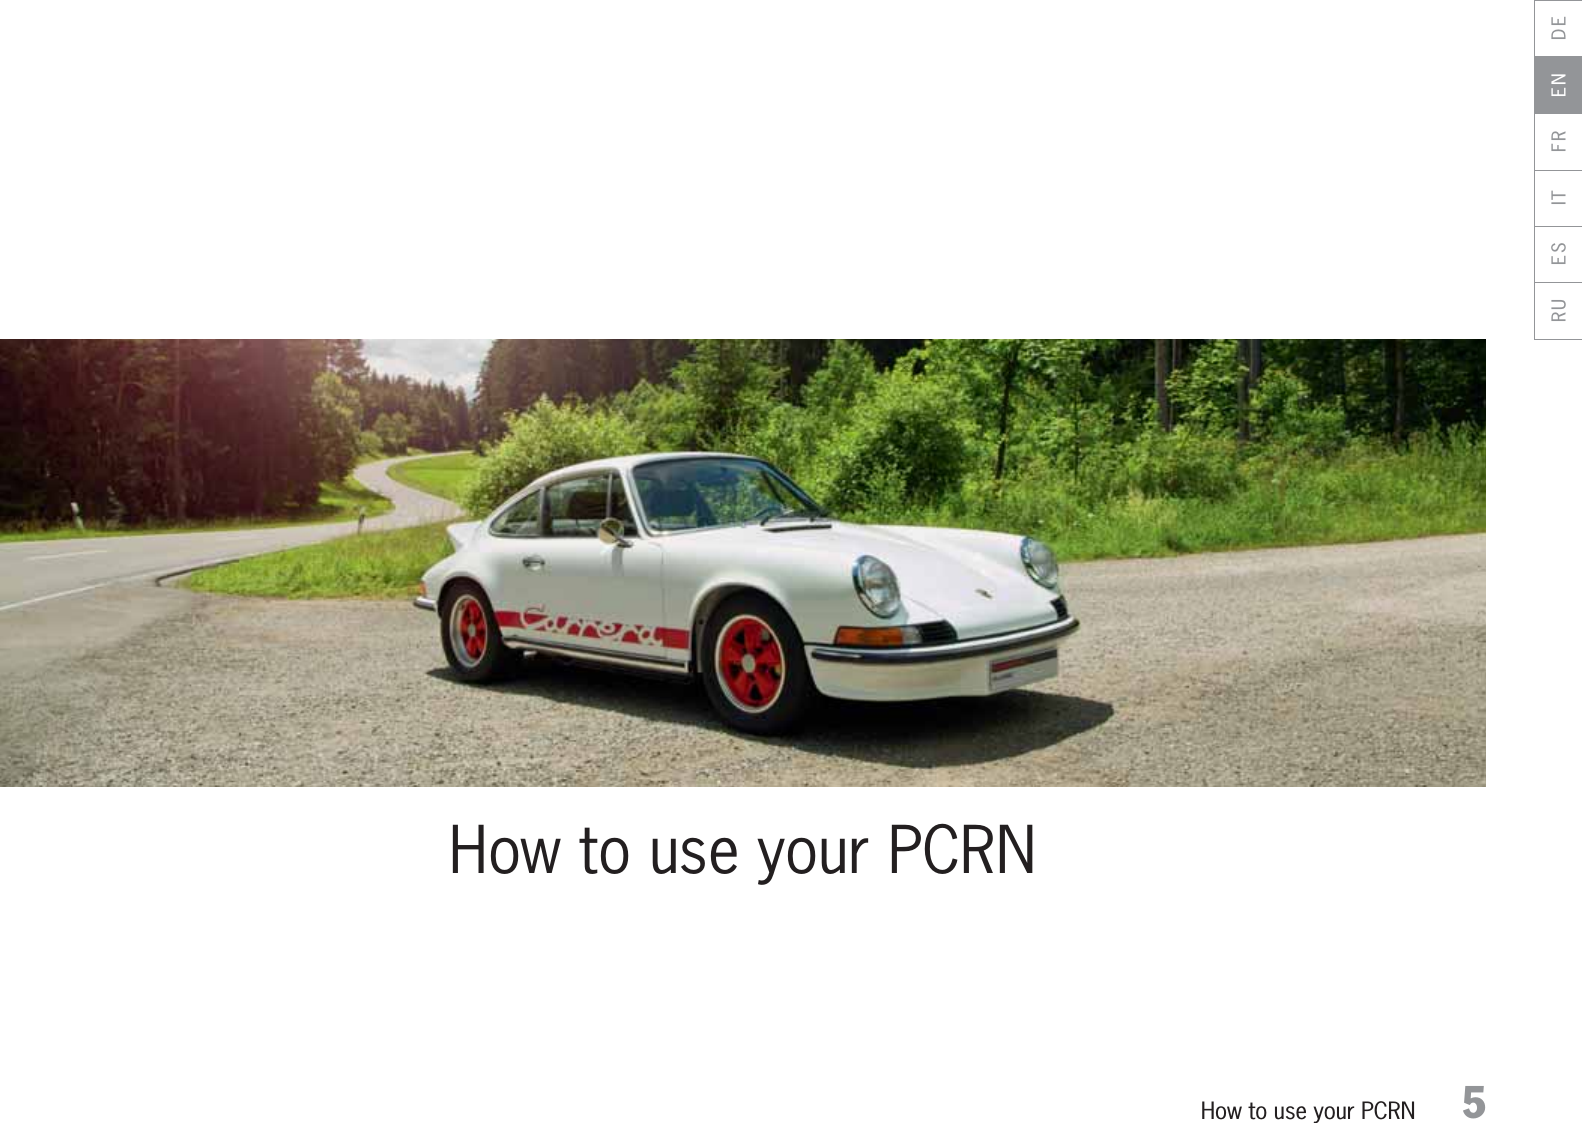 How to use your PCRN 5How to use your PCRNDEENFRITESRU